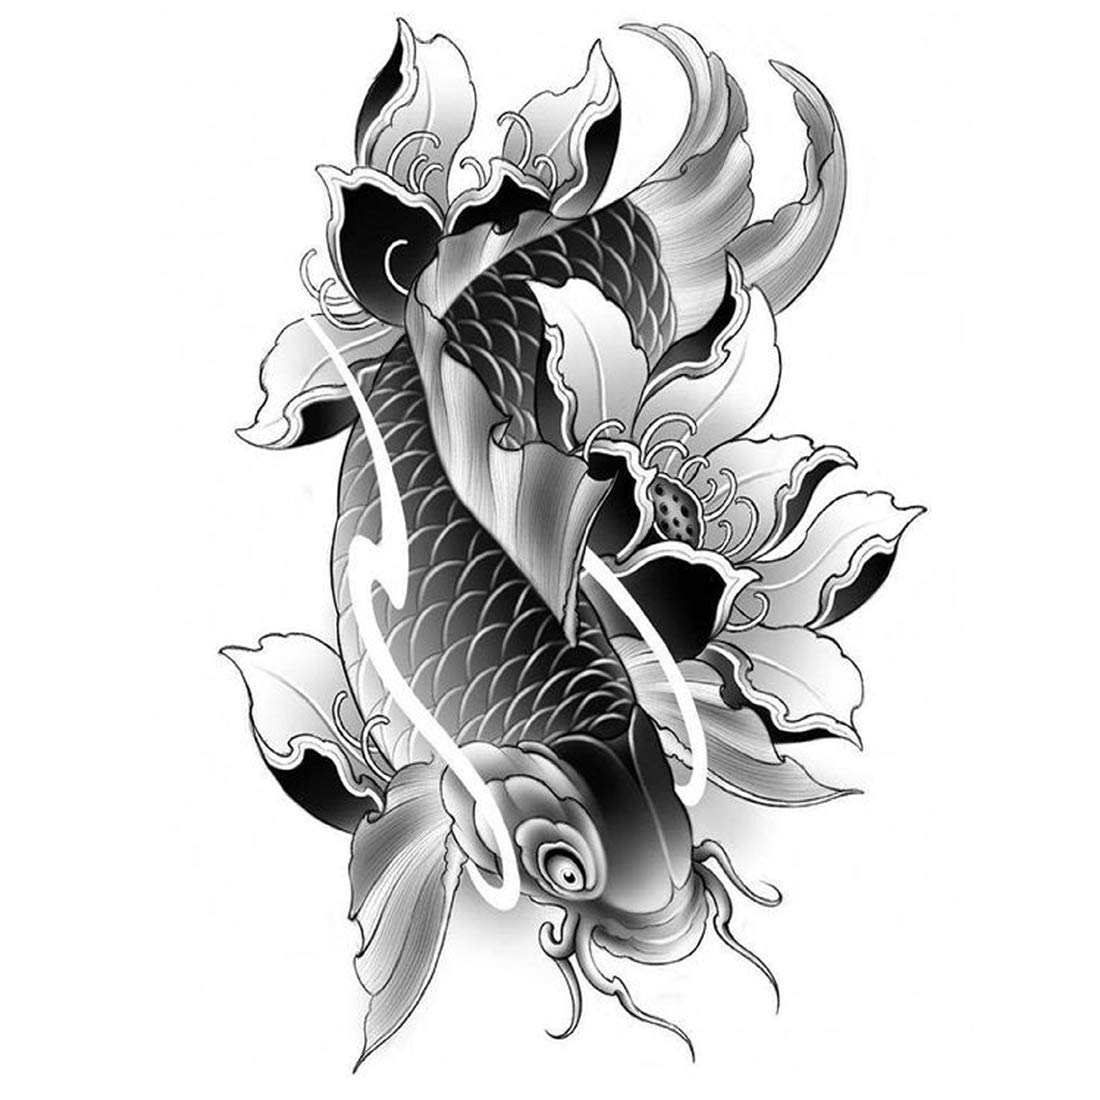 Red and White Koi Fish Best Temporary Tattoos| WannaBeInk.com